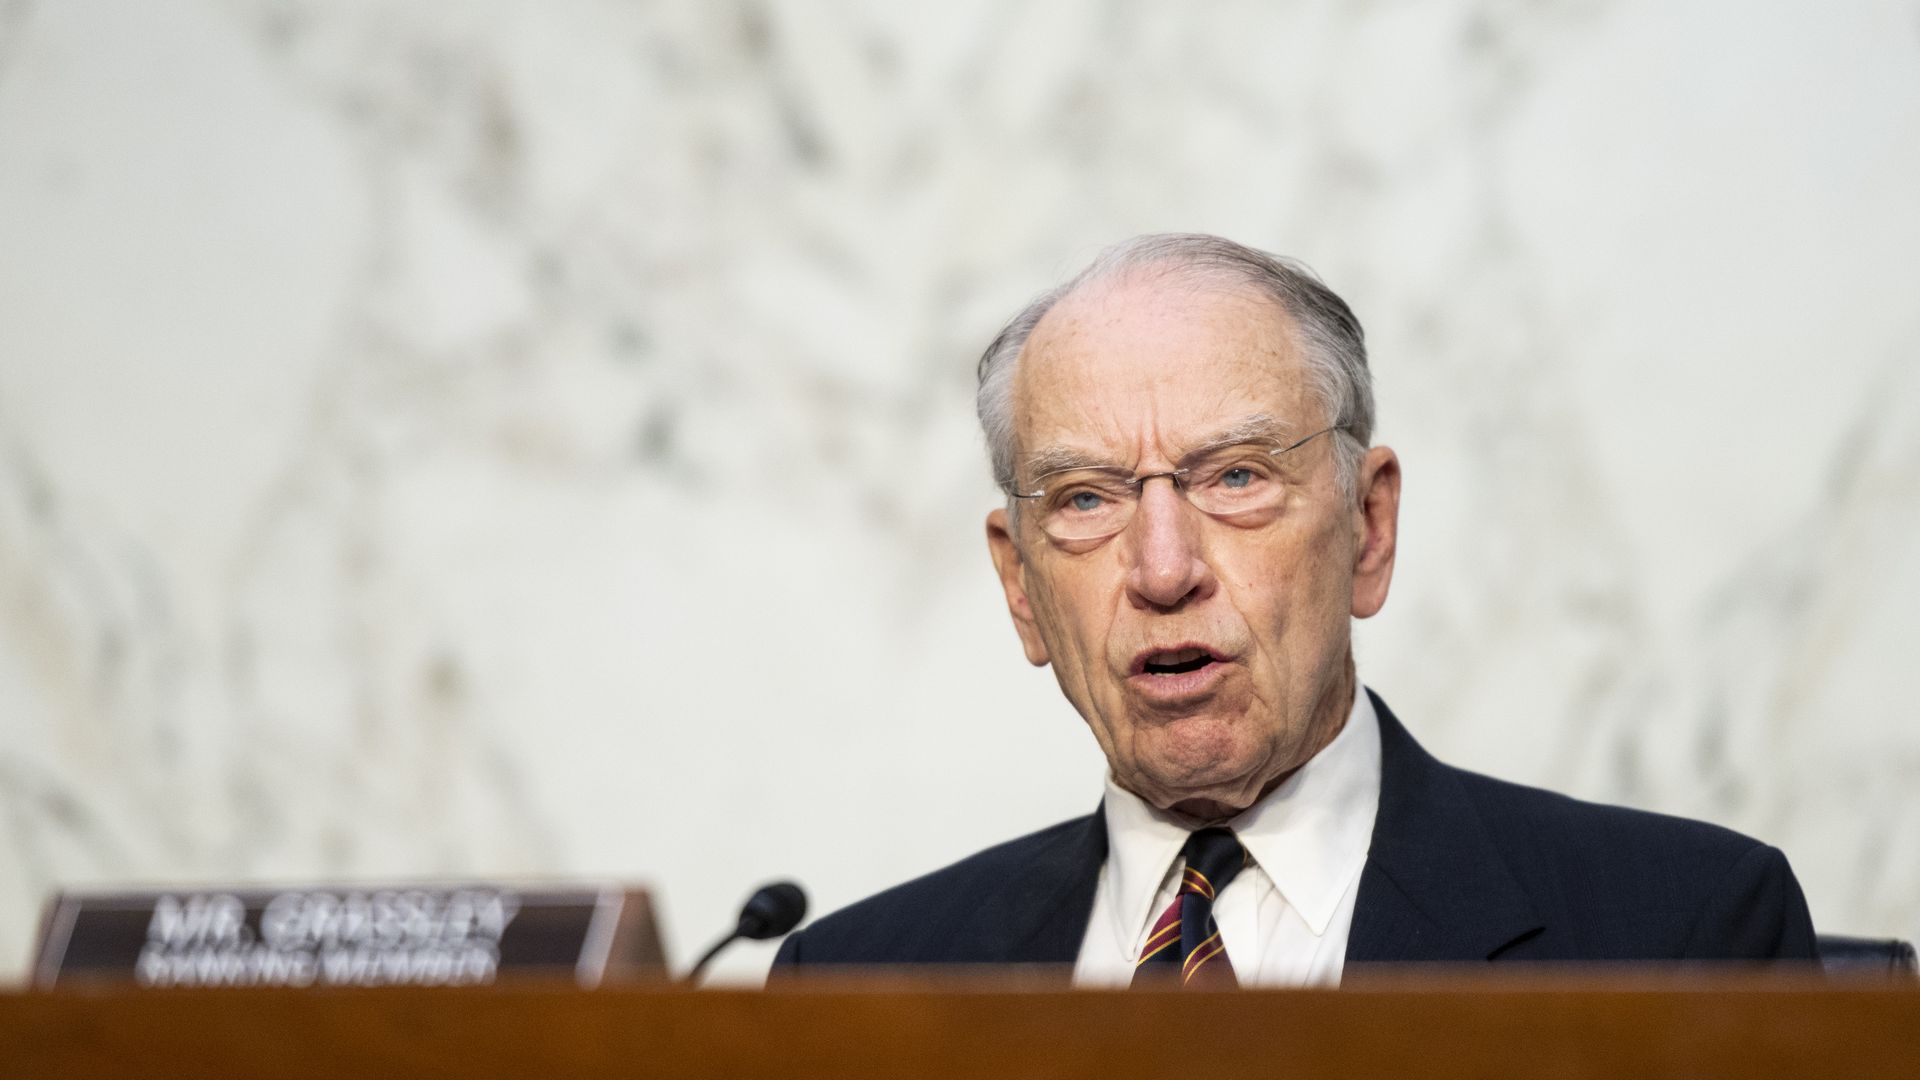 Sen. Chuck Grassley is seen speaking during a congressional hearing.